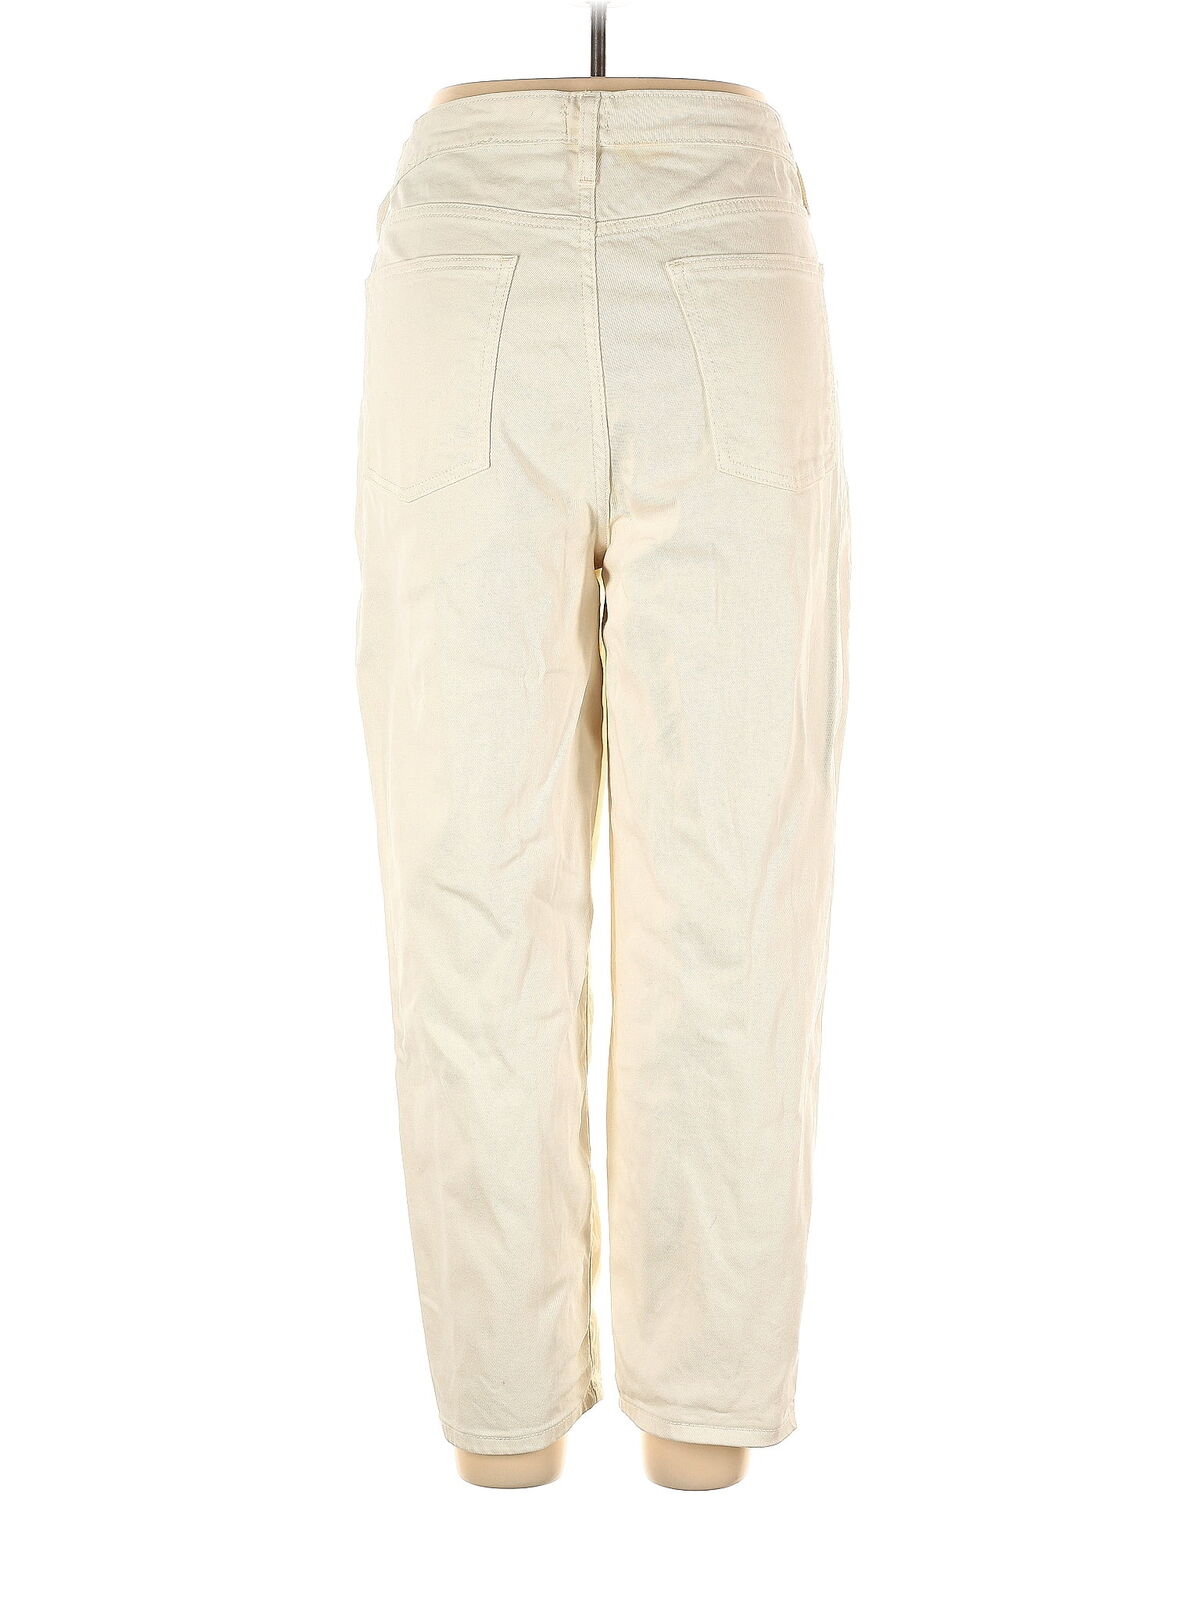 A New Day Women Ivory Jeans 33W - image 2